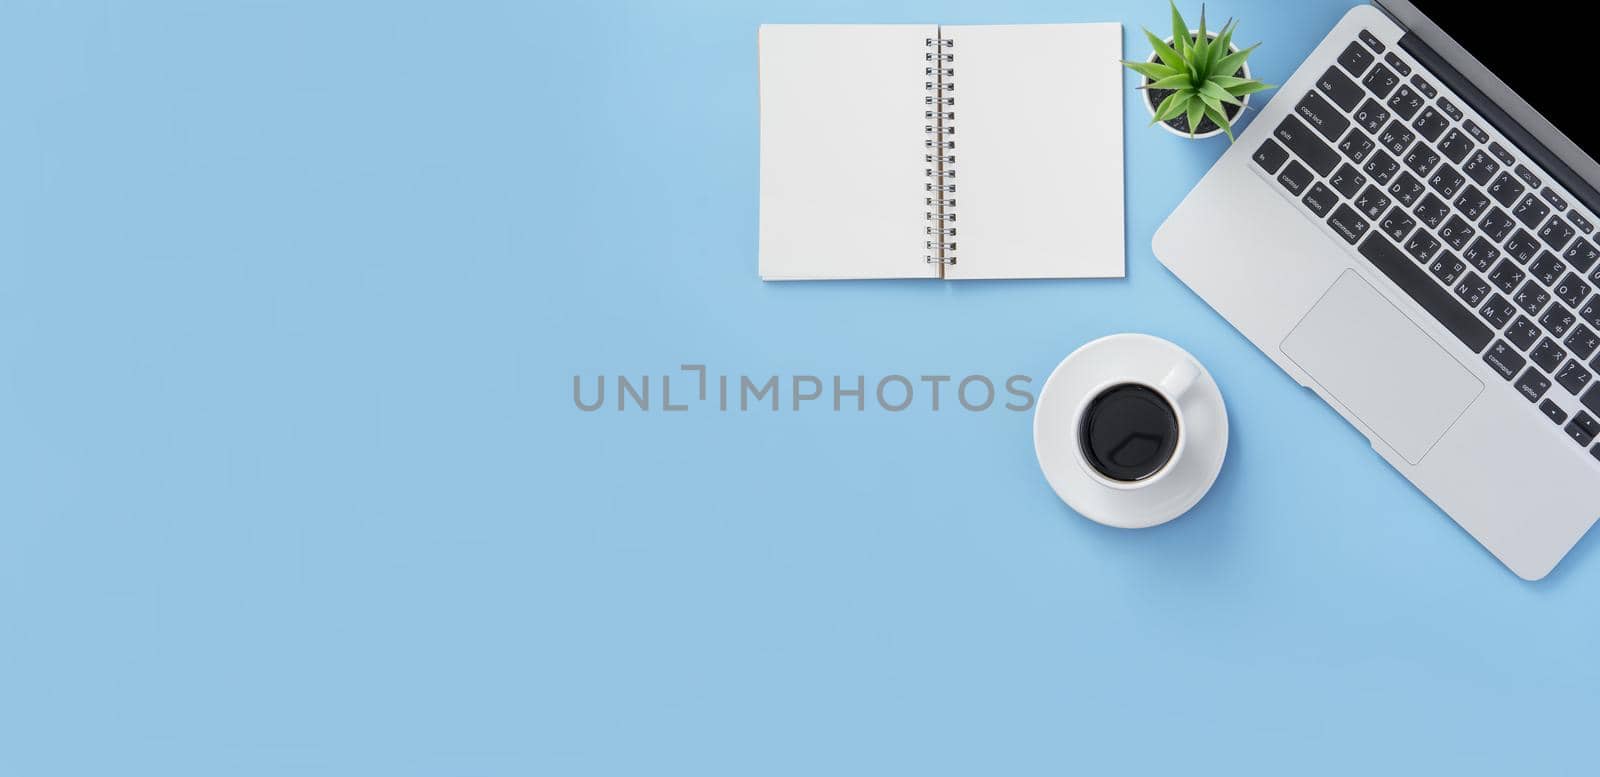 Business concept, relaxation in working time, drinking coffee taking a break on clean light blue office table, copy space, flat lay, top view, mockup by ROMIXIMAGE